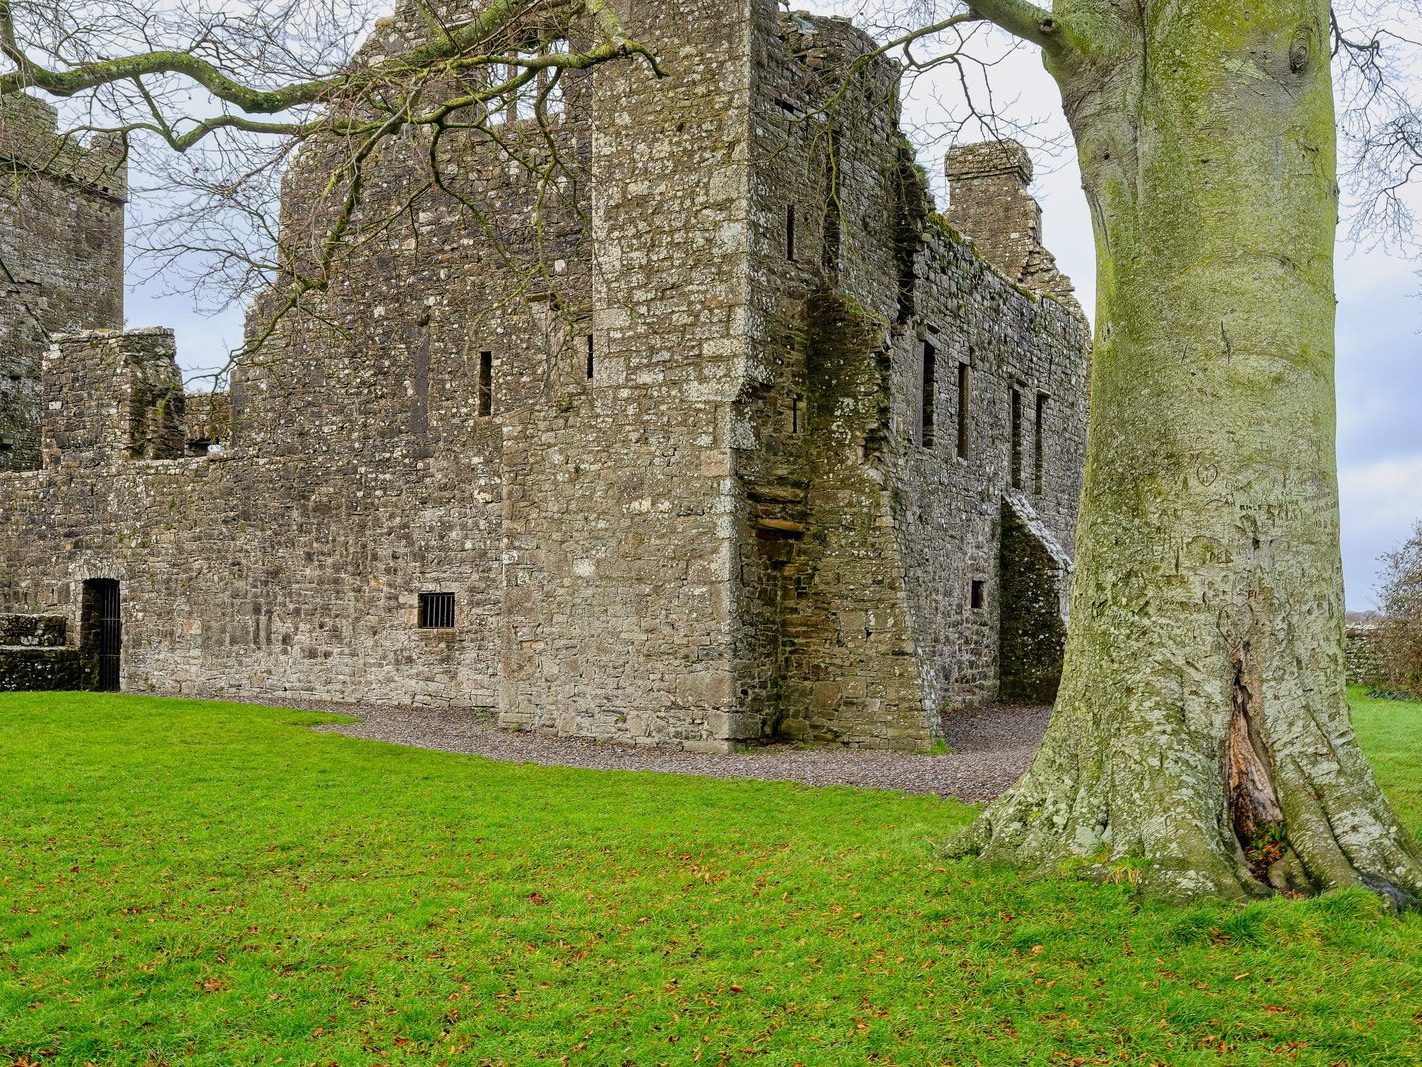 BECTIVE ABBEY WHICH I VISITED LAST CHRISTMAS [THERE WERE NO OTHER VISITORS AS IT WAS A VERY WET DAY]--225212-1